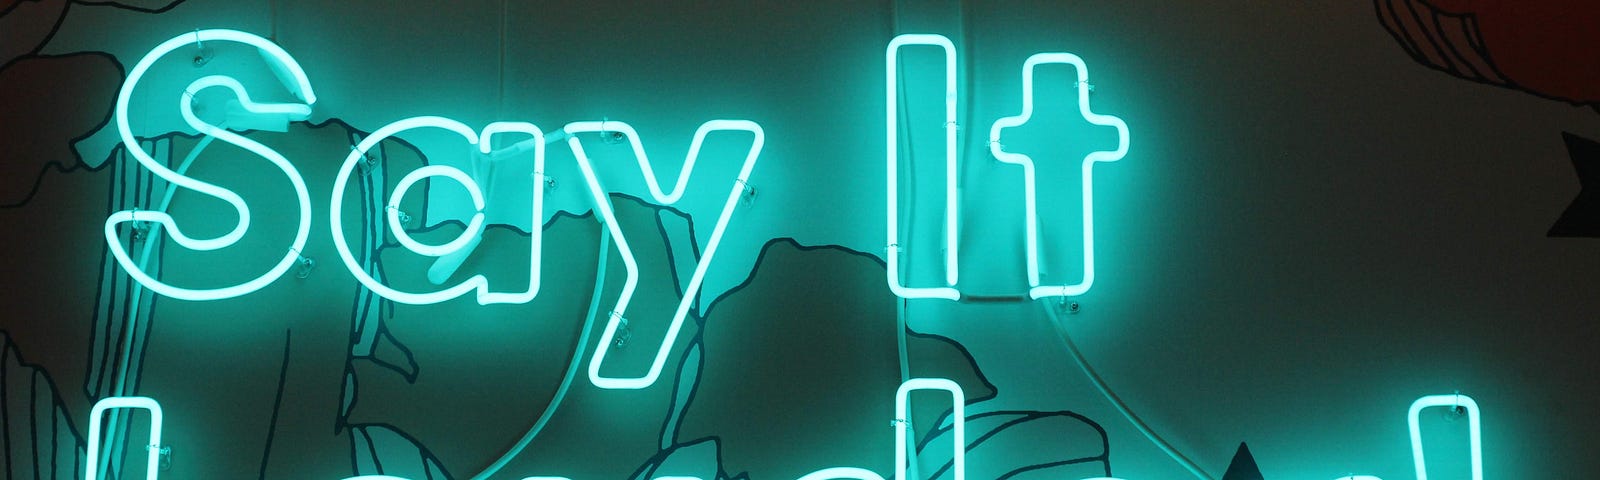 A blue neon sign reading “Say it Louder!”